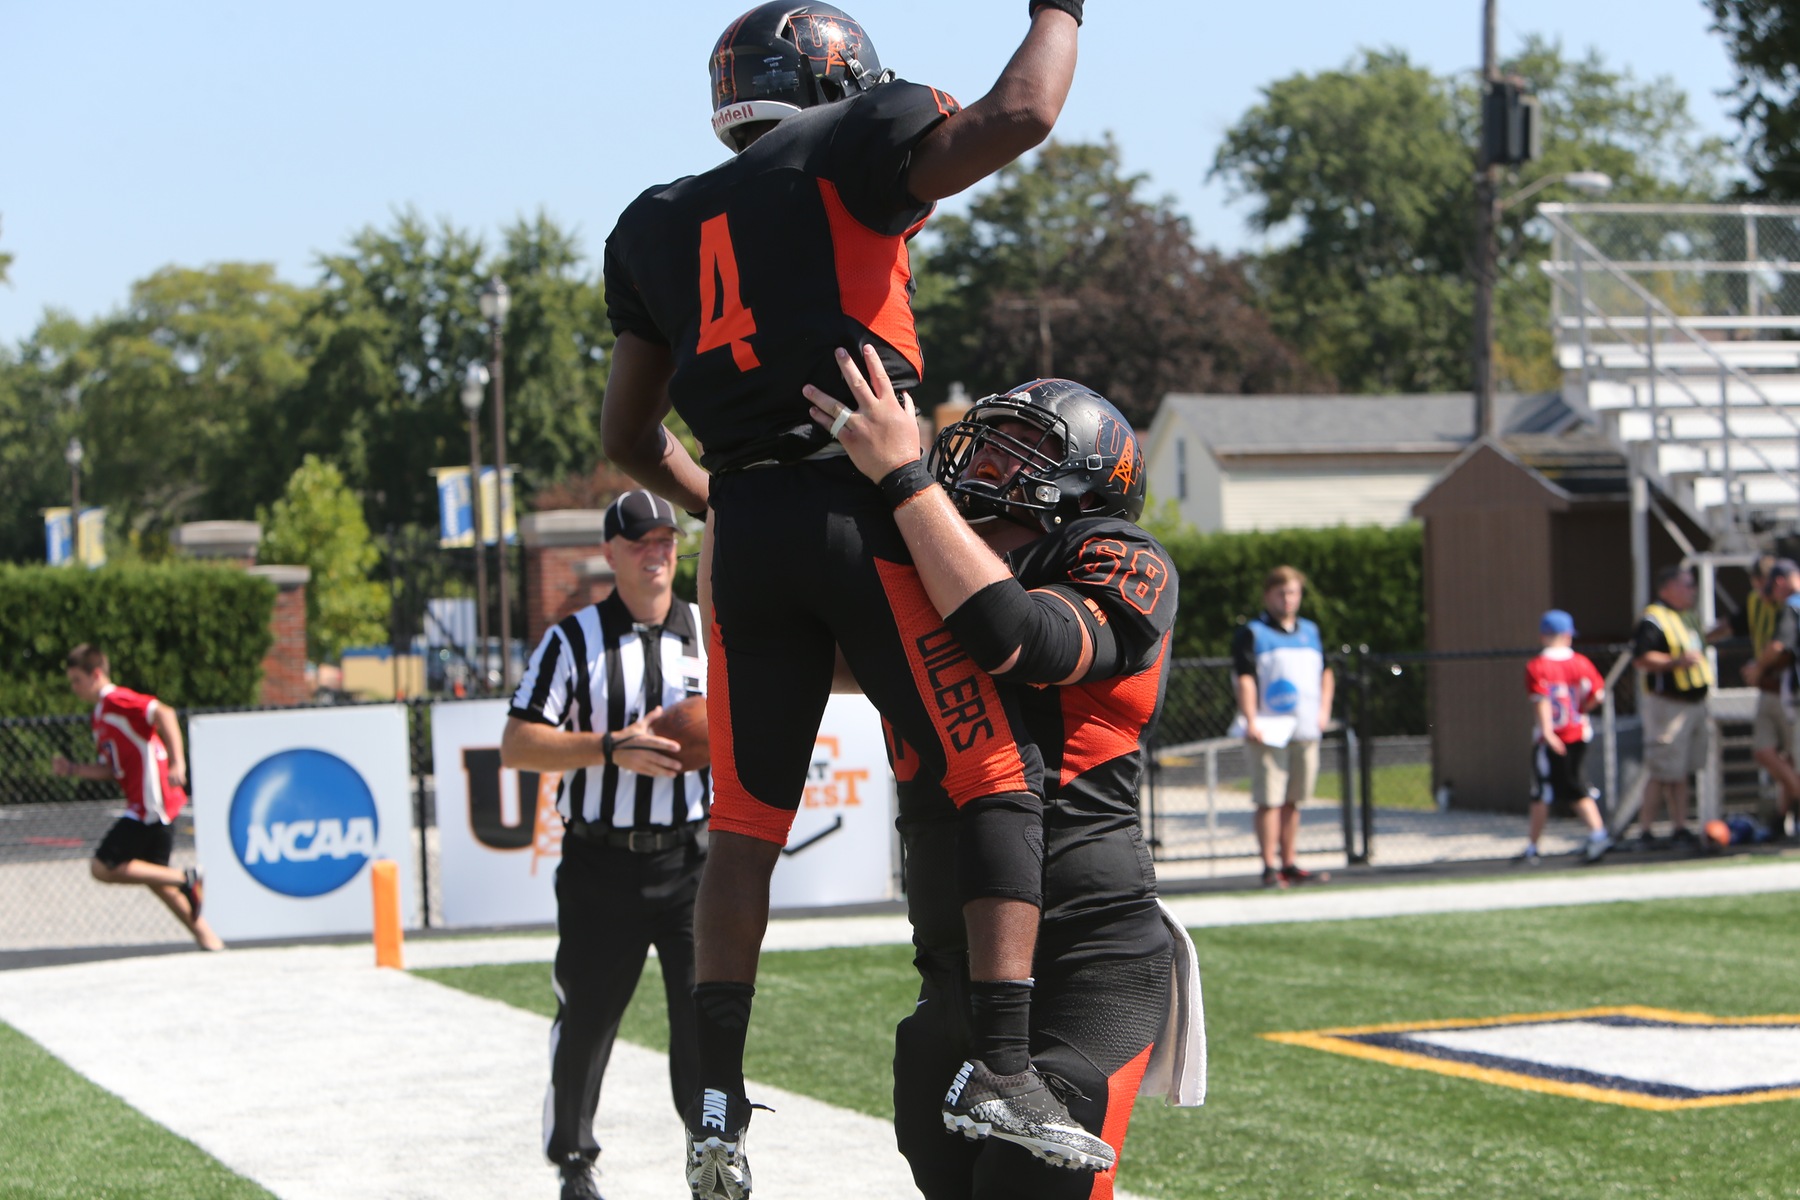 Findlay Travels to Canton for First Ever Great Midwest Contest